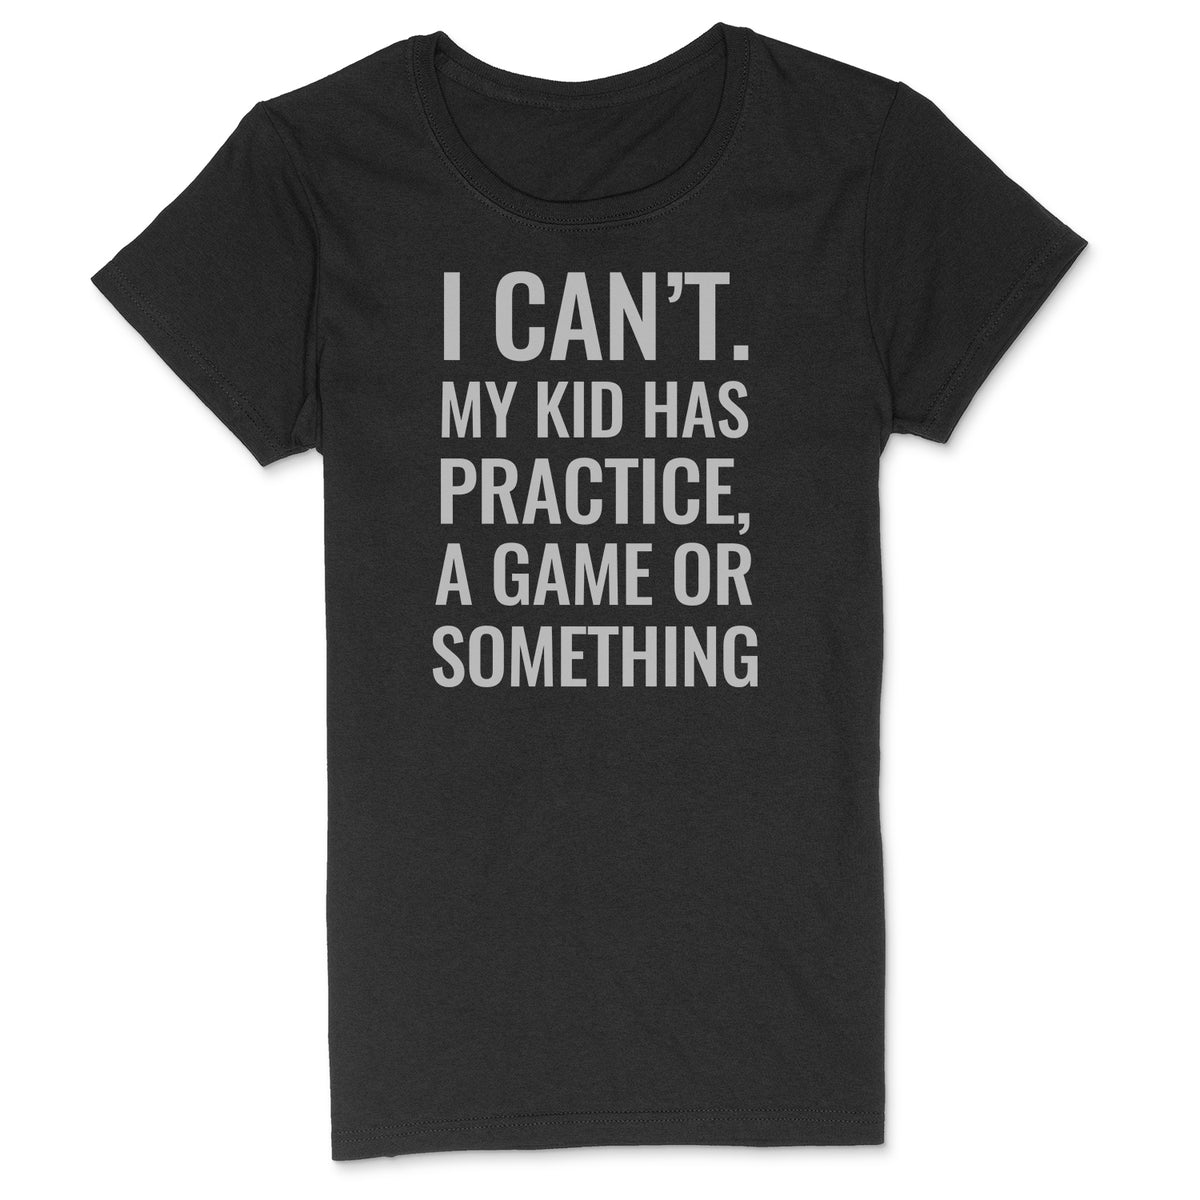 "I Can't" Premium Midweight Ringspun Cotton T-Shirt - Womens Fits